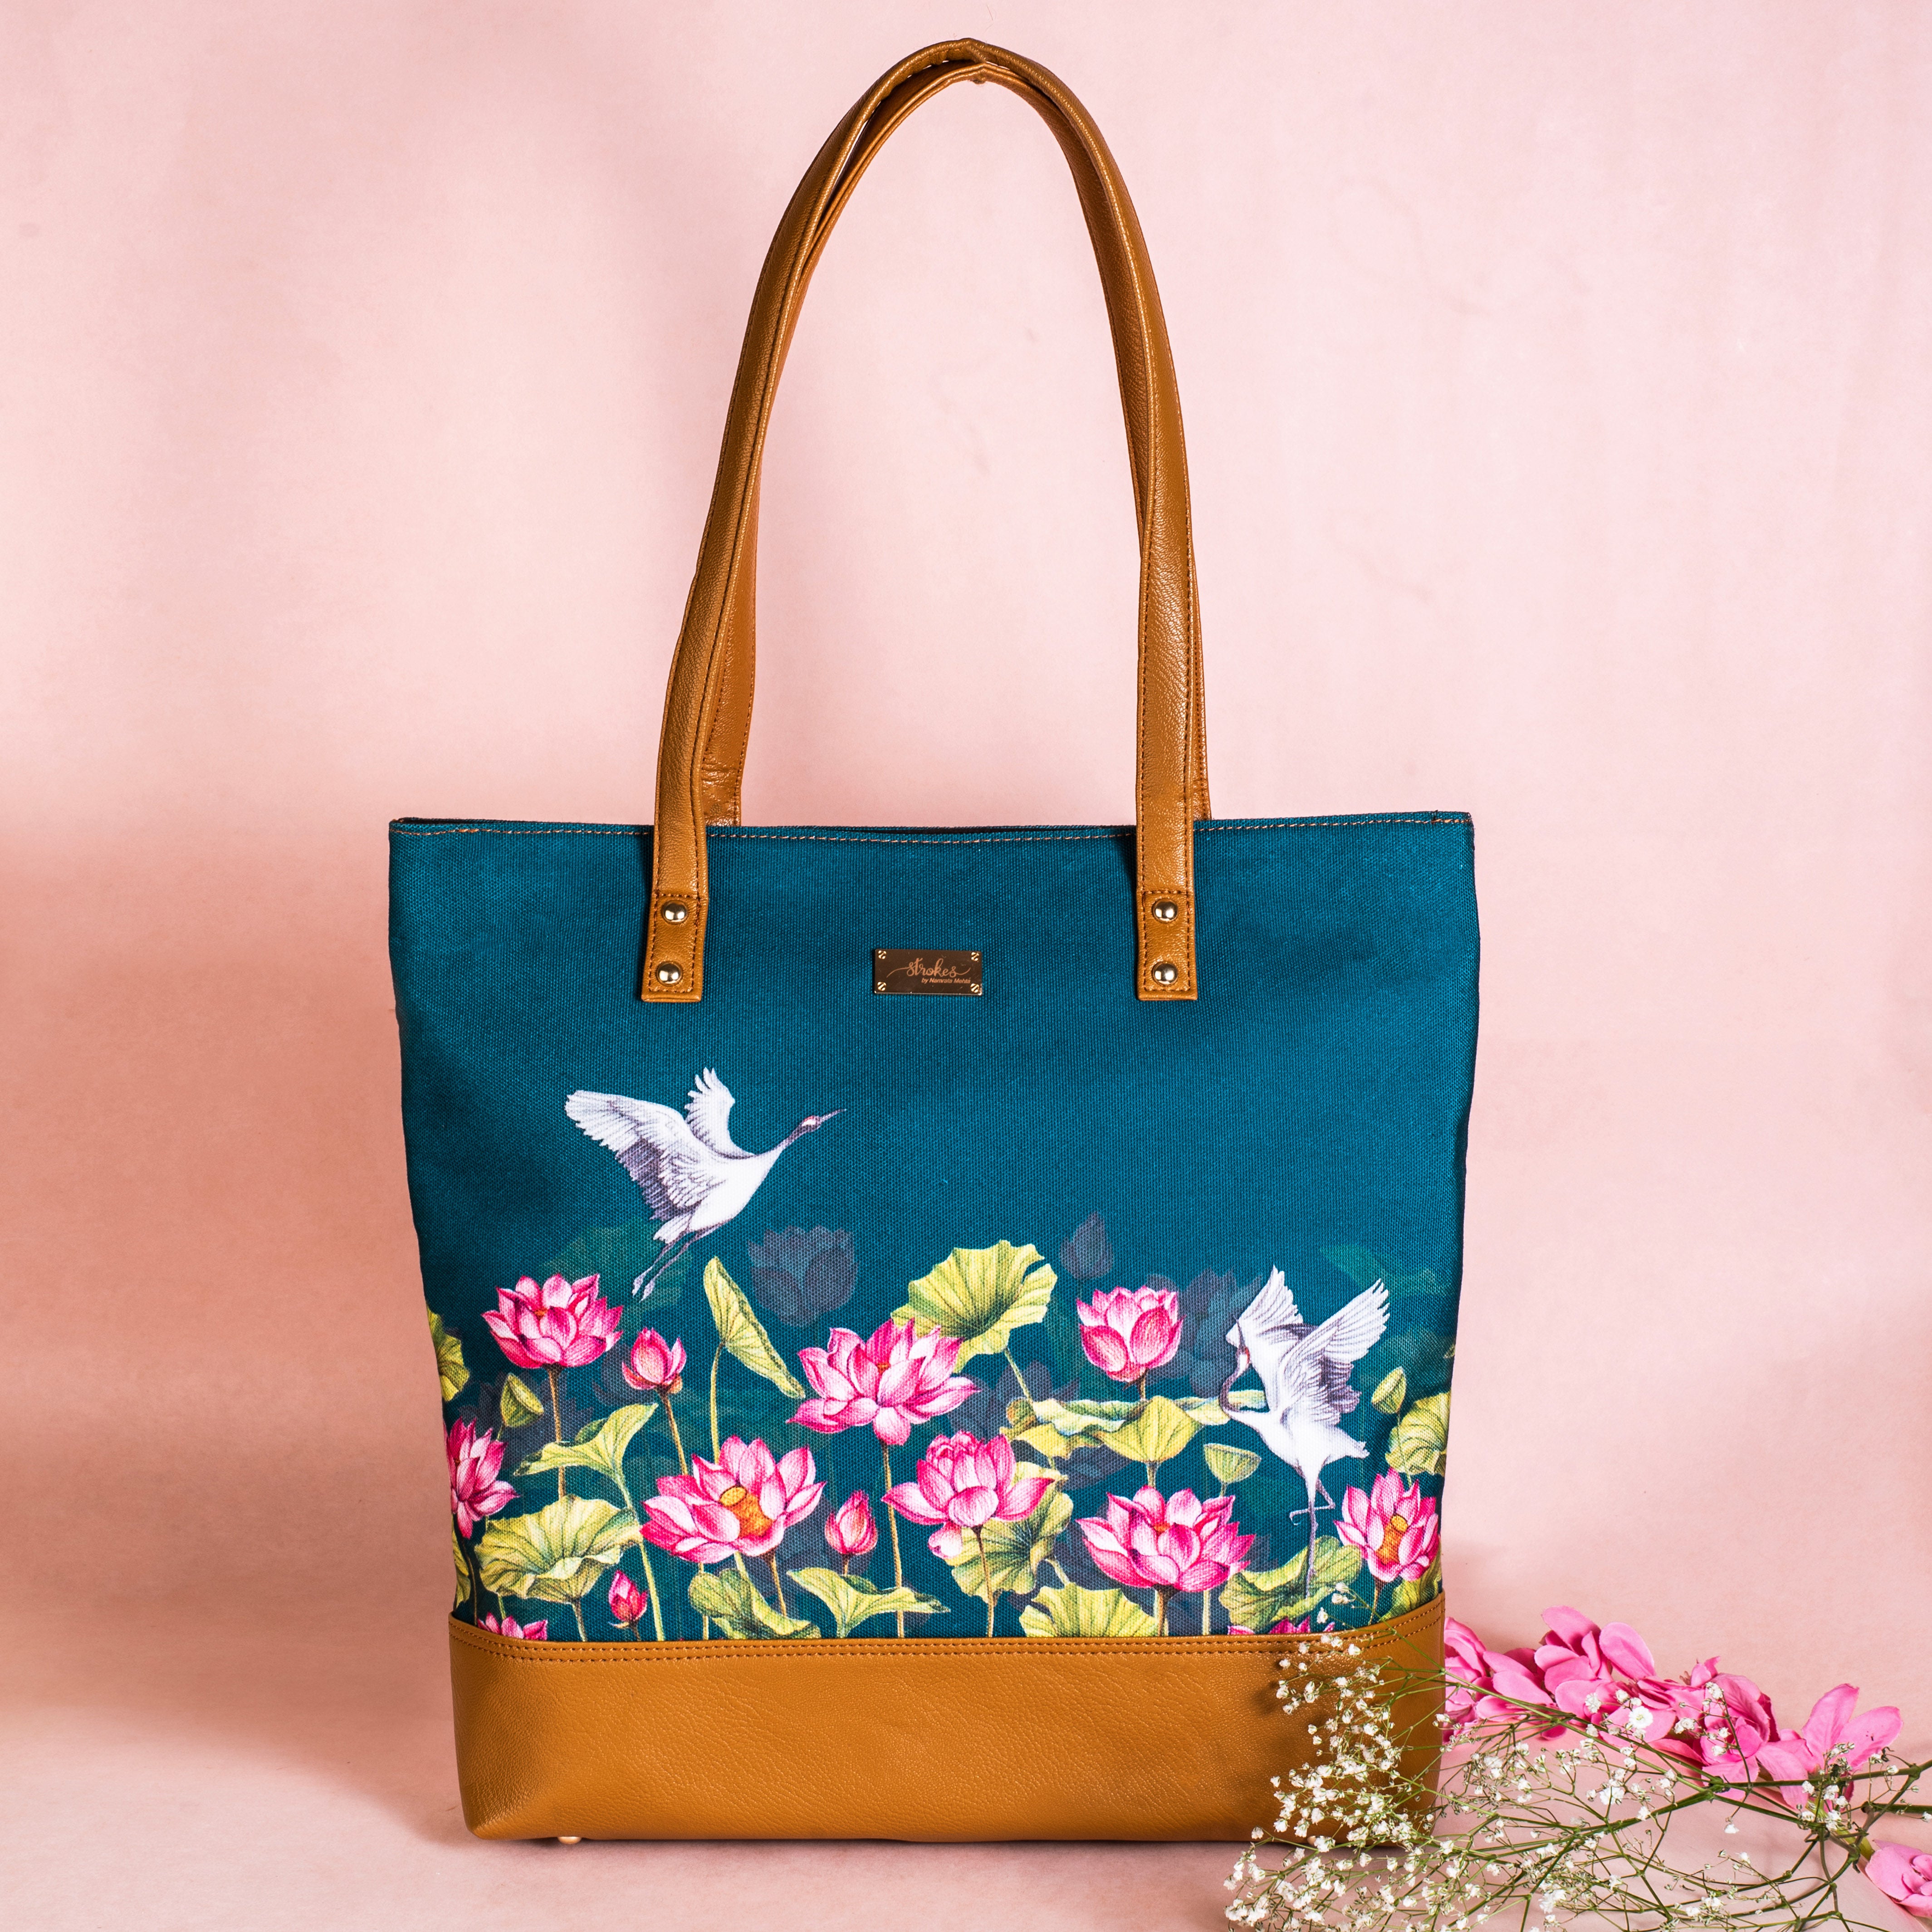 The Mini Everyday Tote in Tapestry | Béis Travel | Everyday tote, Travel tote  bag, Women